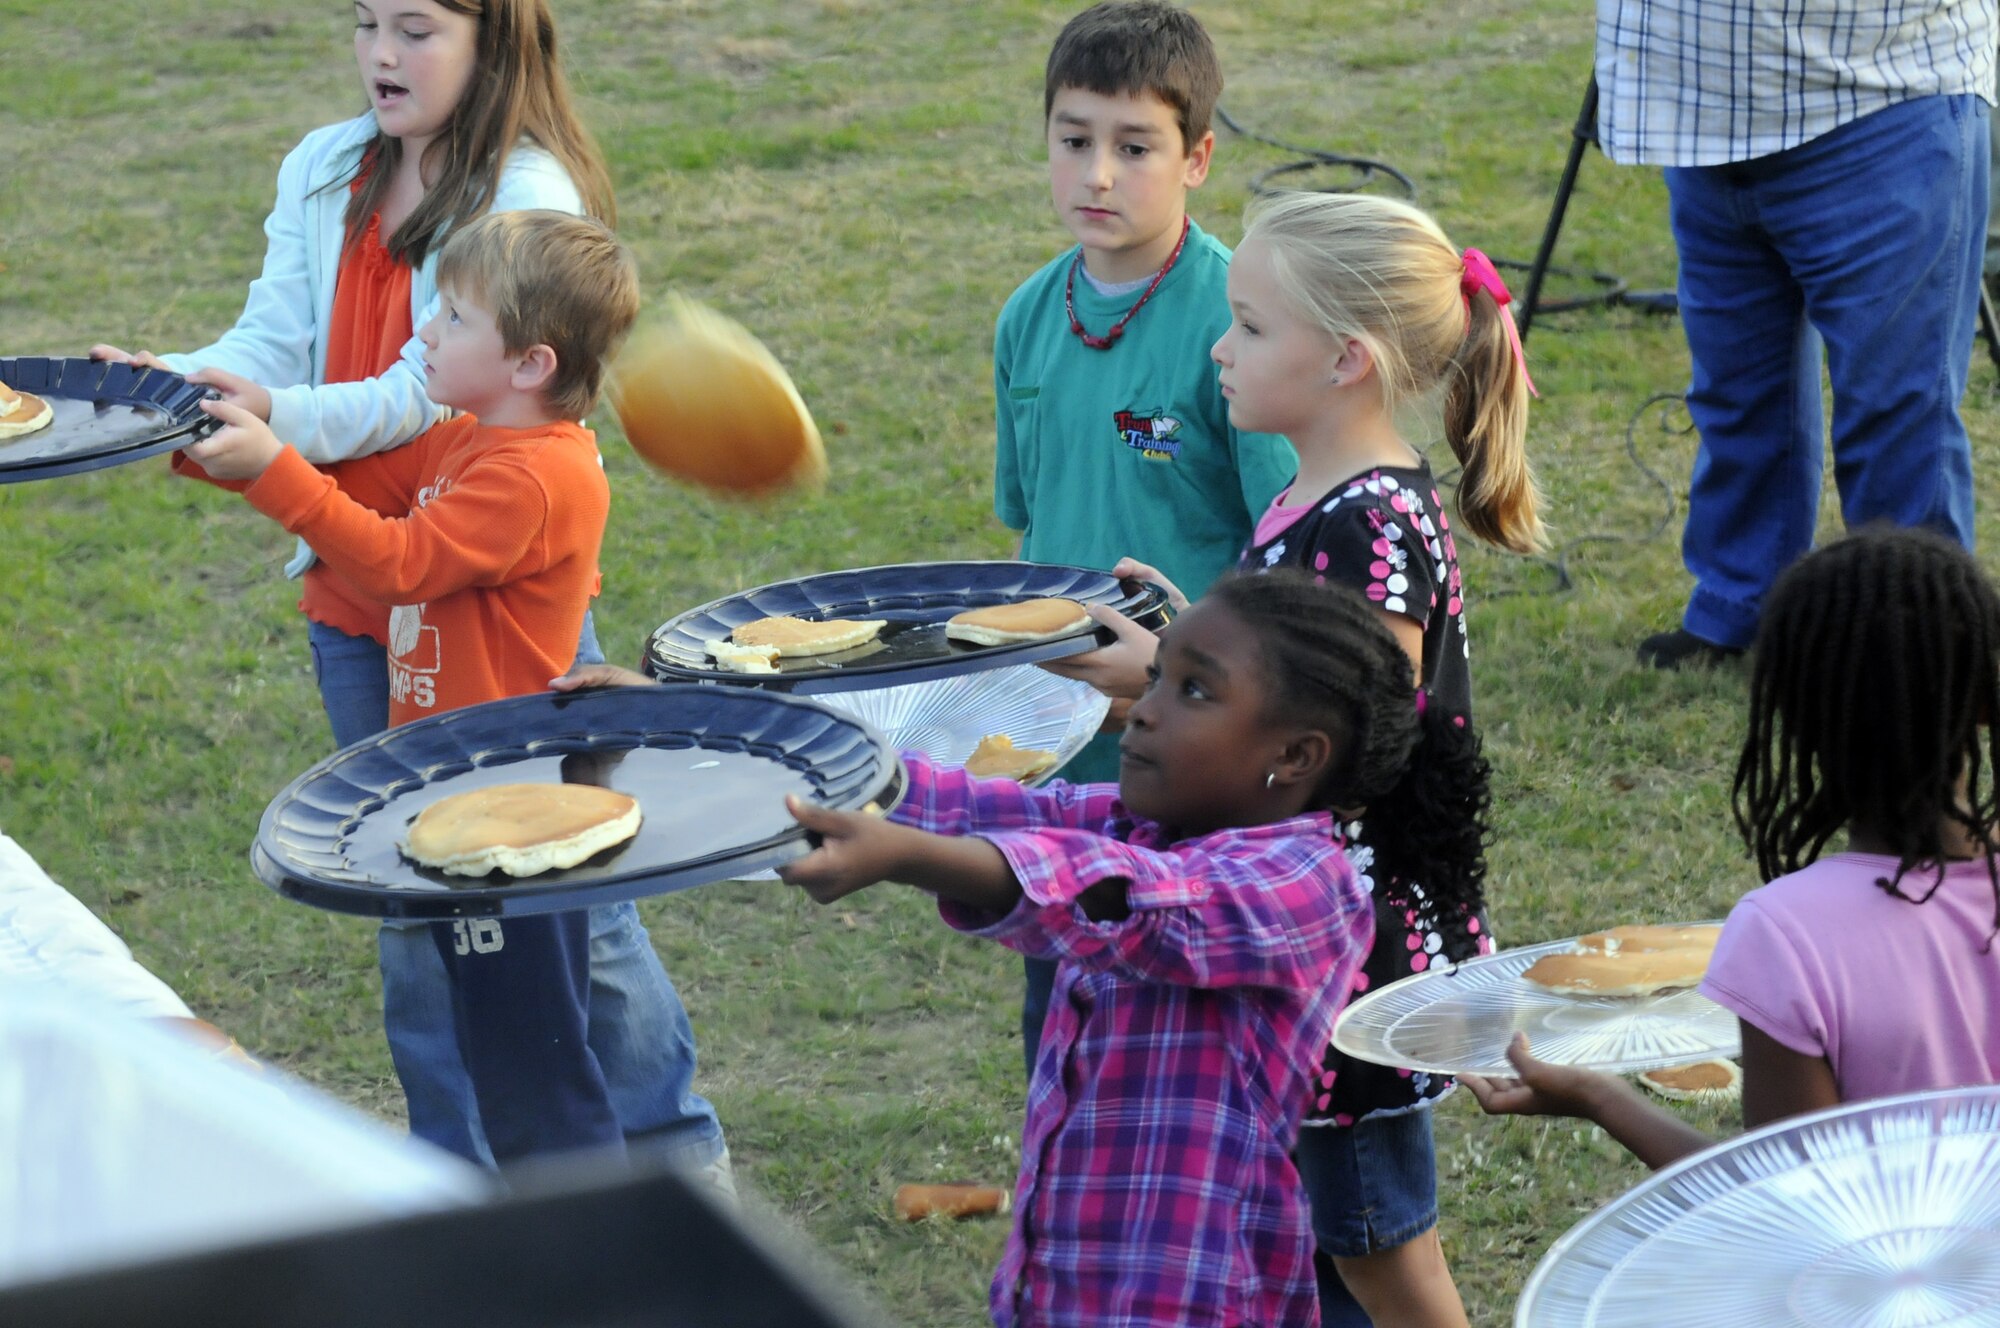 The Robins Chapel and Airmen’s Ministry sponsored a free pancake flip Nov. 10 at Robins Park for Team Robins personnel and family members. Col. Carl Buhler, 78th Air Base Wing commander, said the pancake flip is a 50-year tradition of the U.S. Air Force Air Demonstration Squadron “Thunderbirds.” He served as a maintenance officer with the unit and decided to bring the event to the Robins community. U.S. Air Force Photo by Sue Sapp


